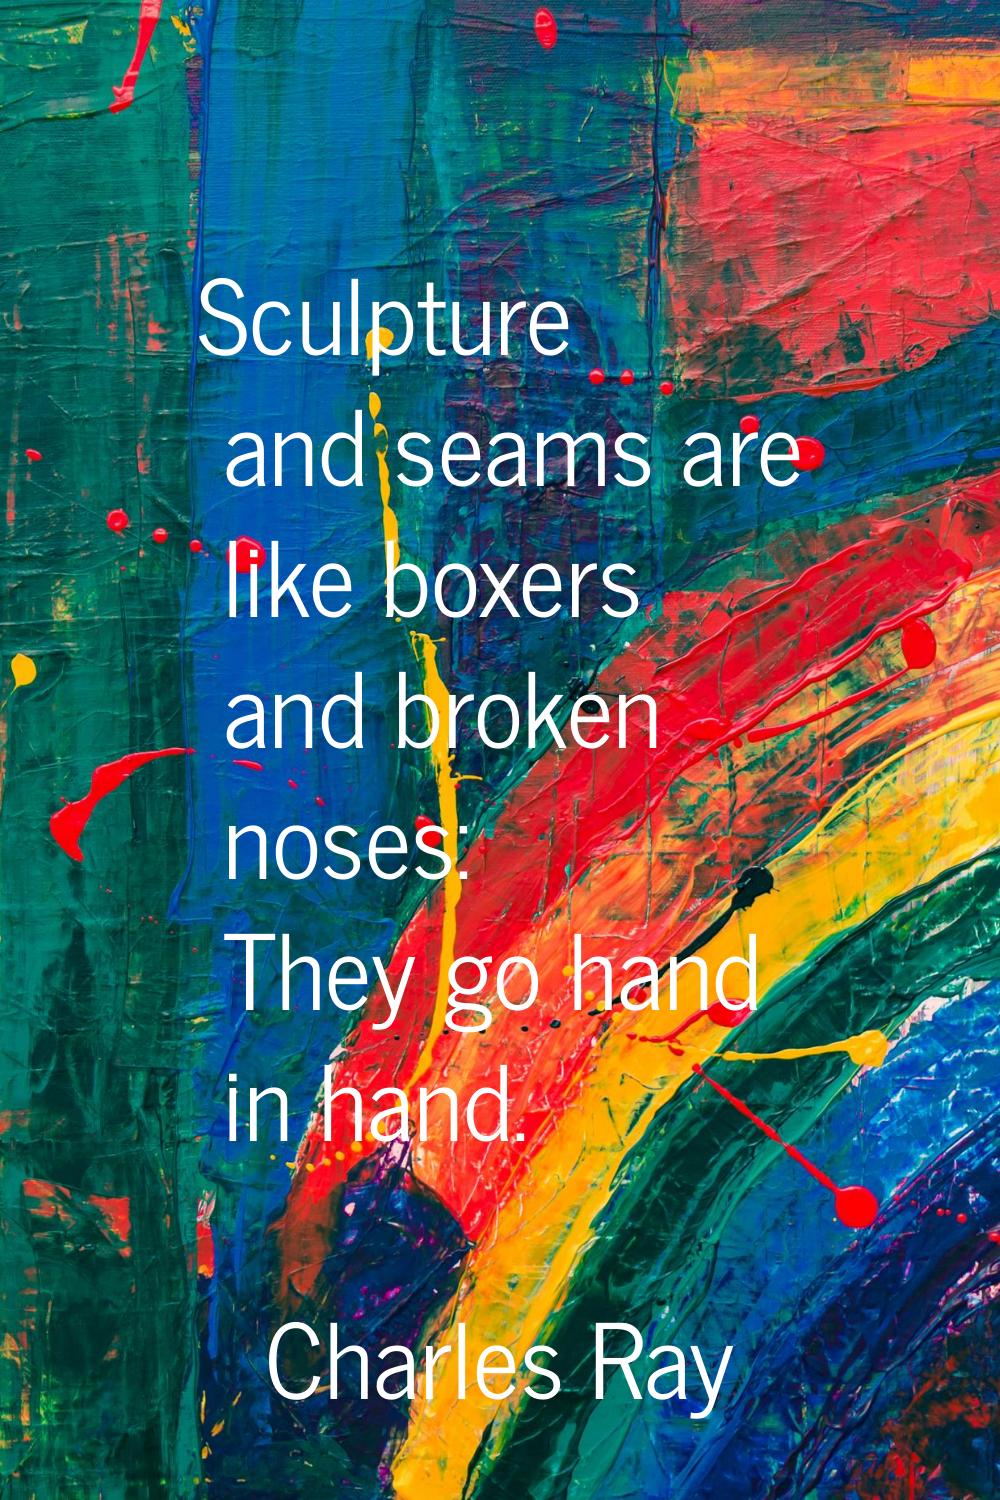 Sculpture and seams are like boxers and broken noses: They go hand in hand.